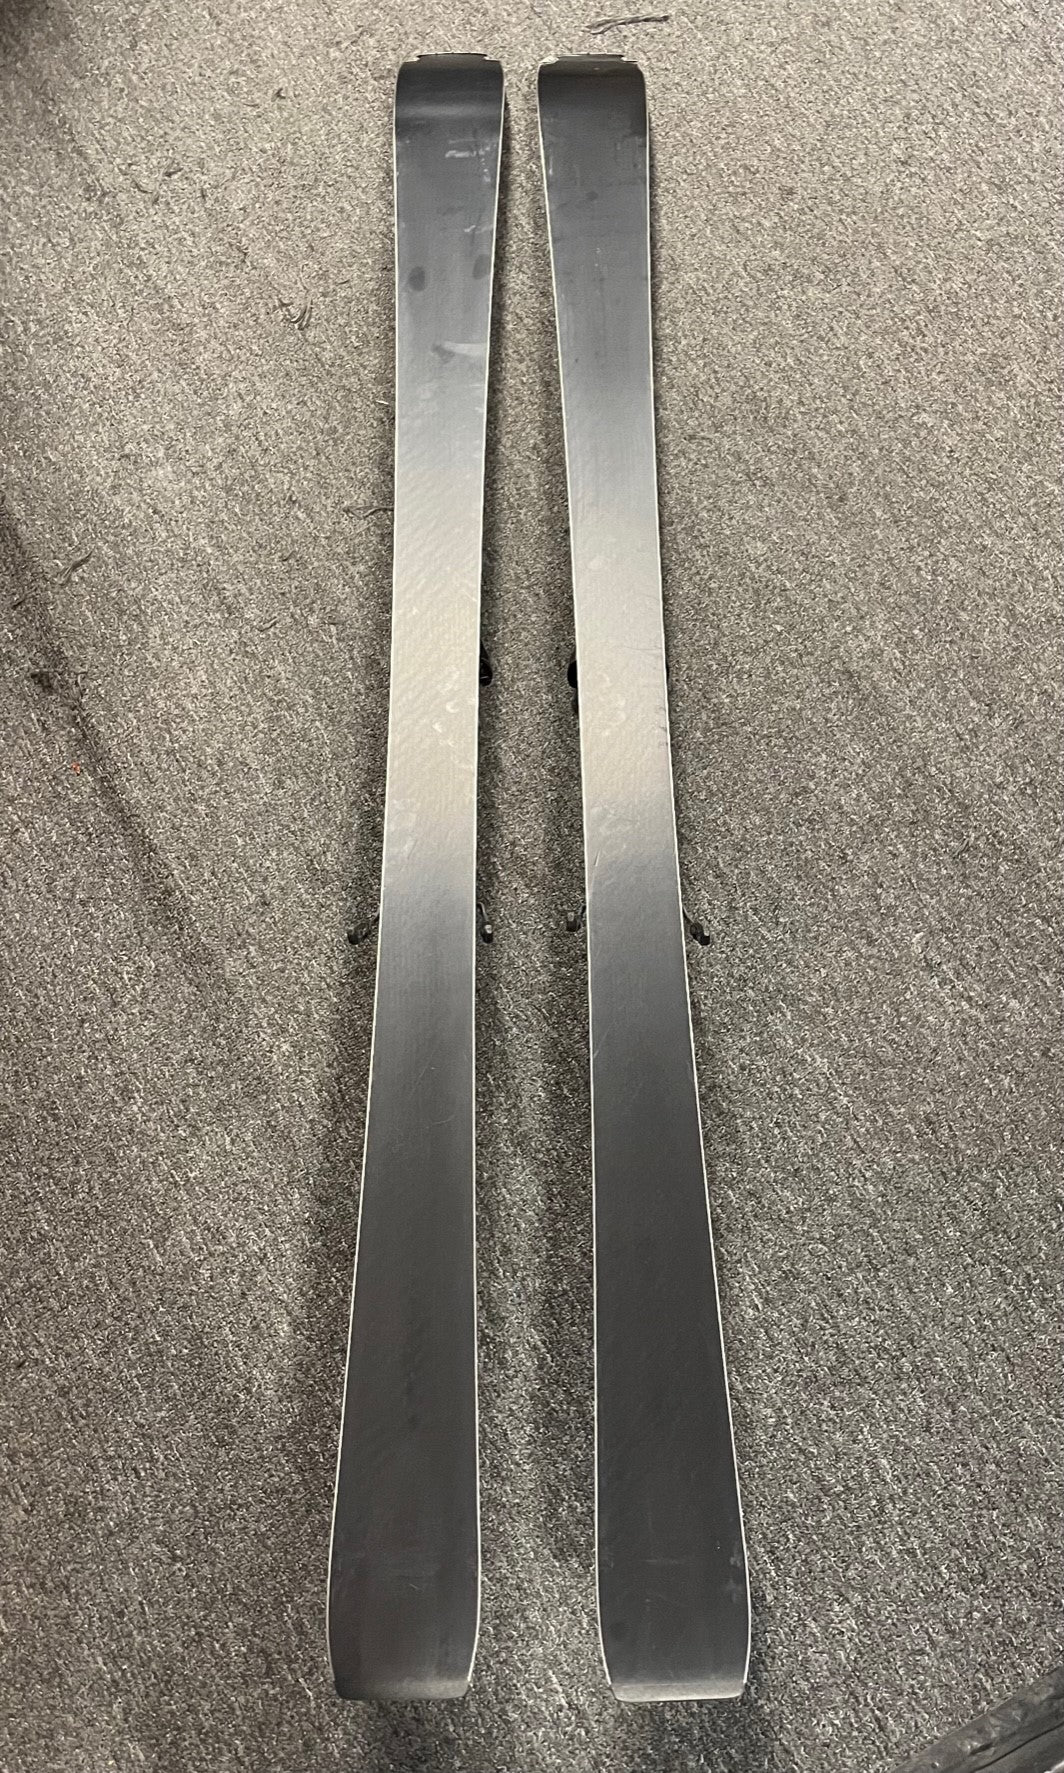 Atomic Vantage 79 C Skis w/ M10 GW Bind Waxed & Sharpened-Sports Replay - Sports Excellence-Sports Replay - Sports Excellence